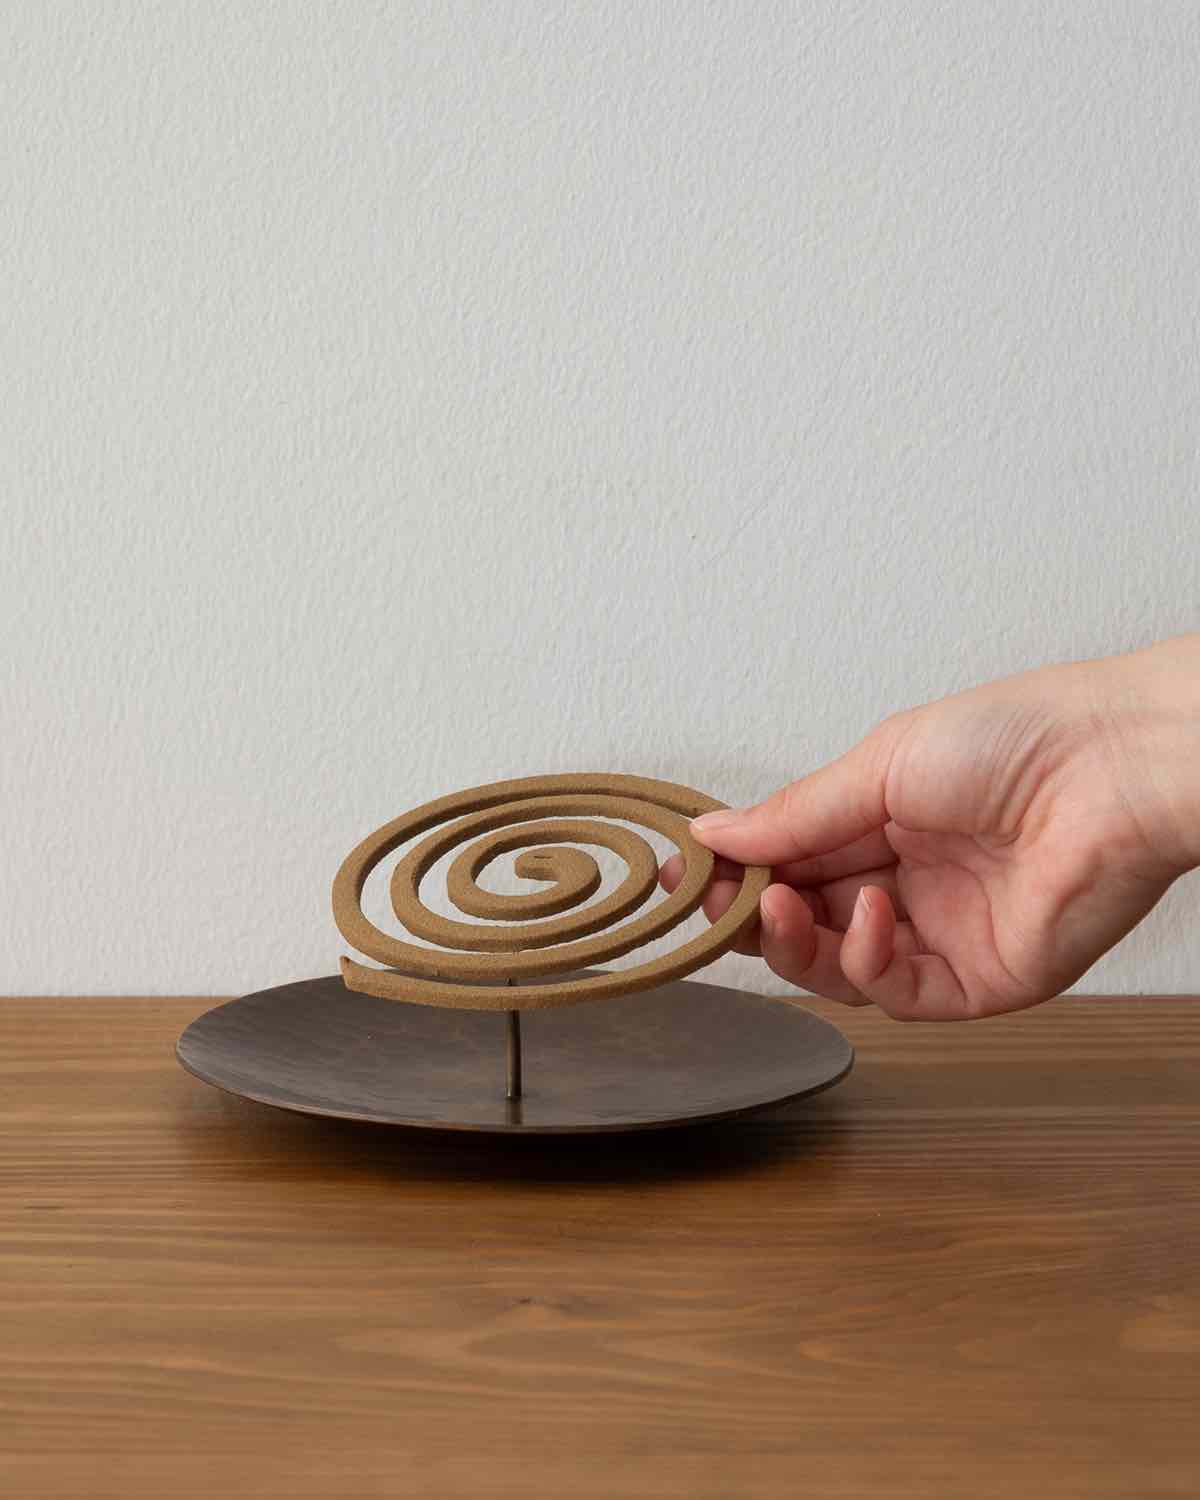 MOSQUITO COIL HOLDER